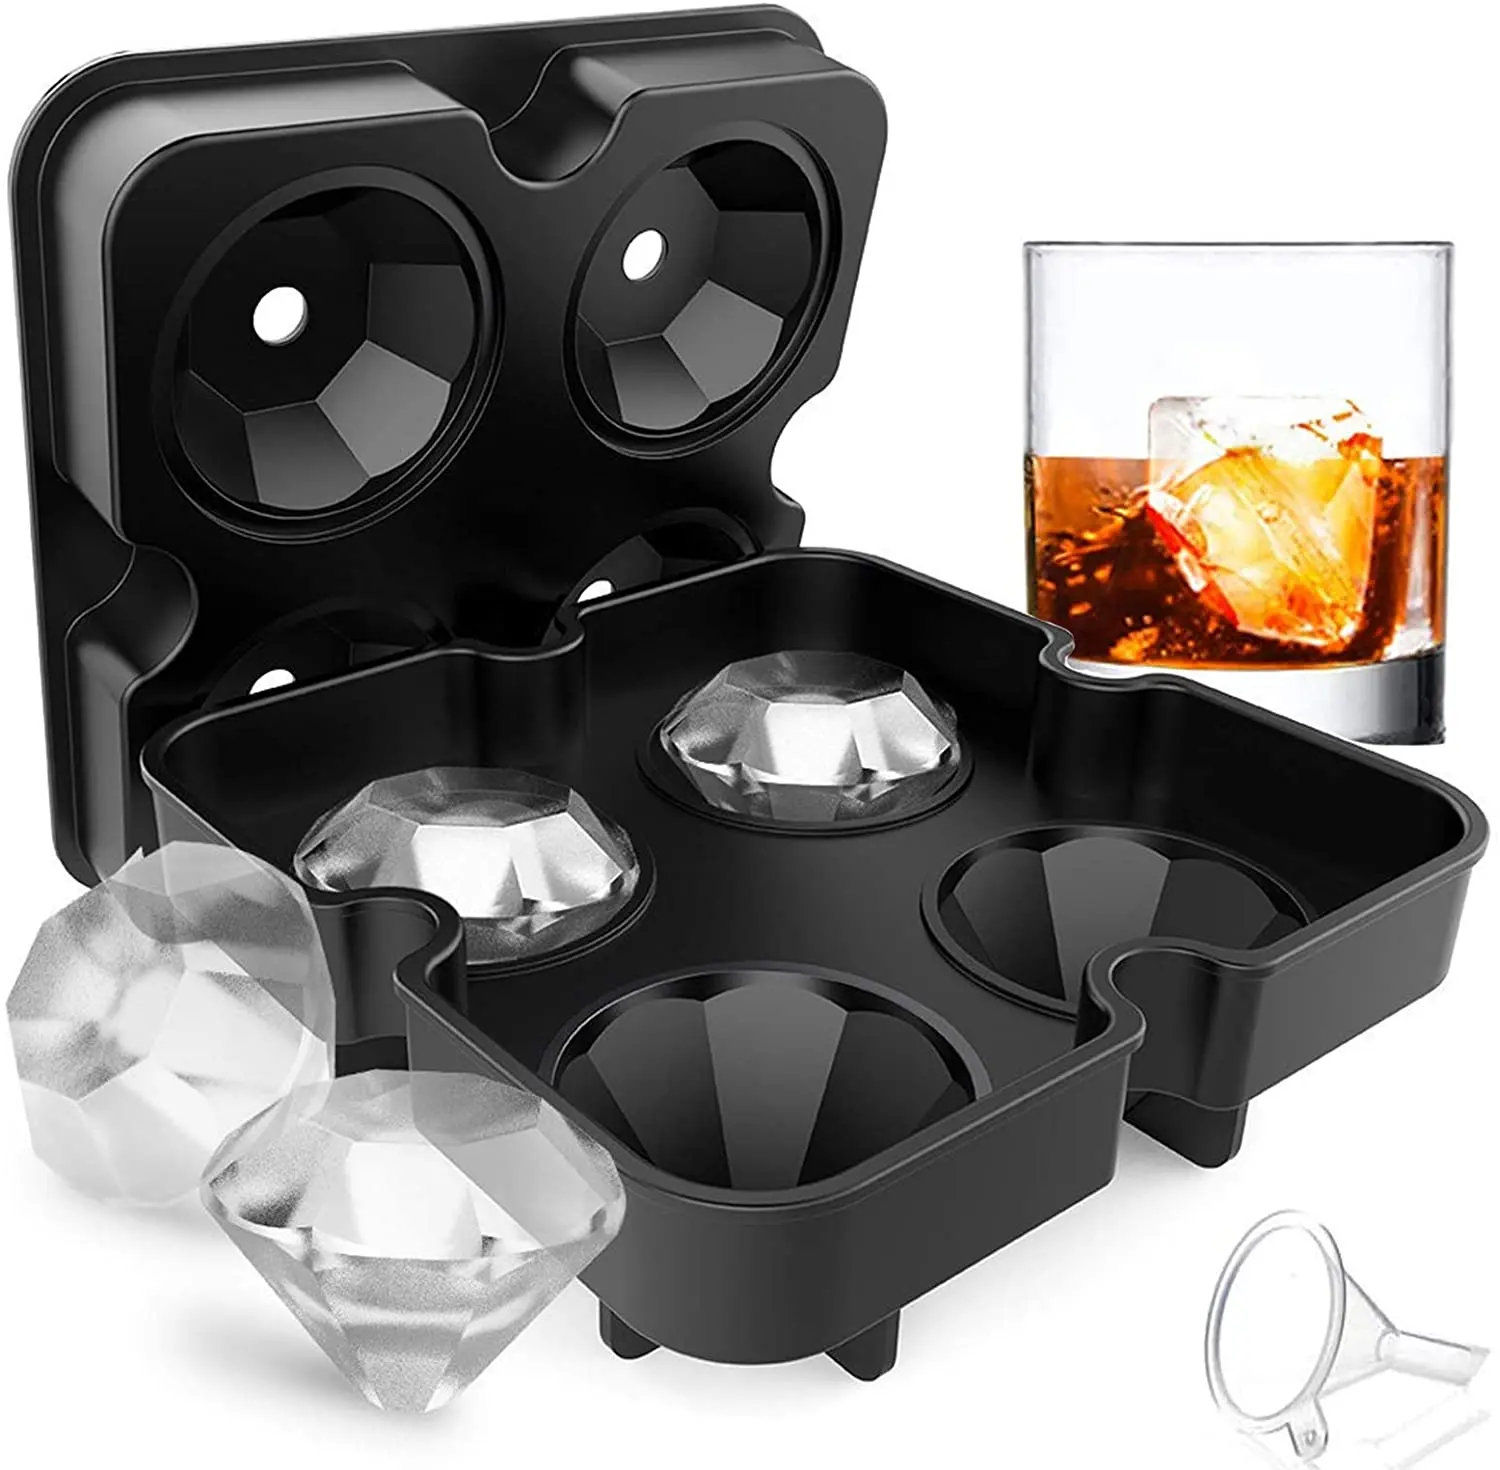 

Reusable and BPA Free Diamond Silicone Ice Cube Mold 4 Cavity Large Sphere Mold Whiskey Ice Cube Tray with Lids, Black, blue